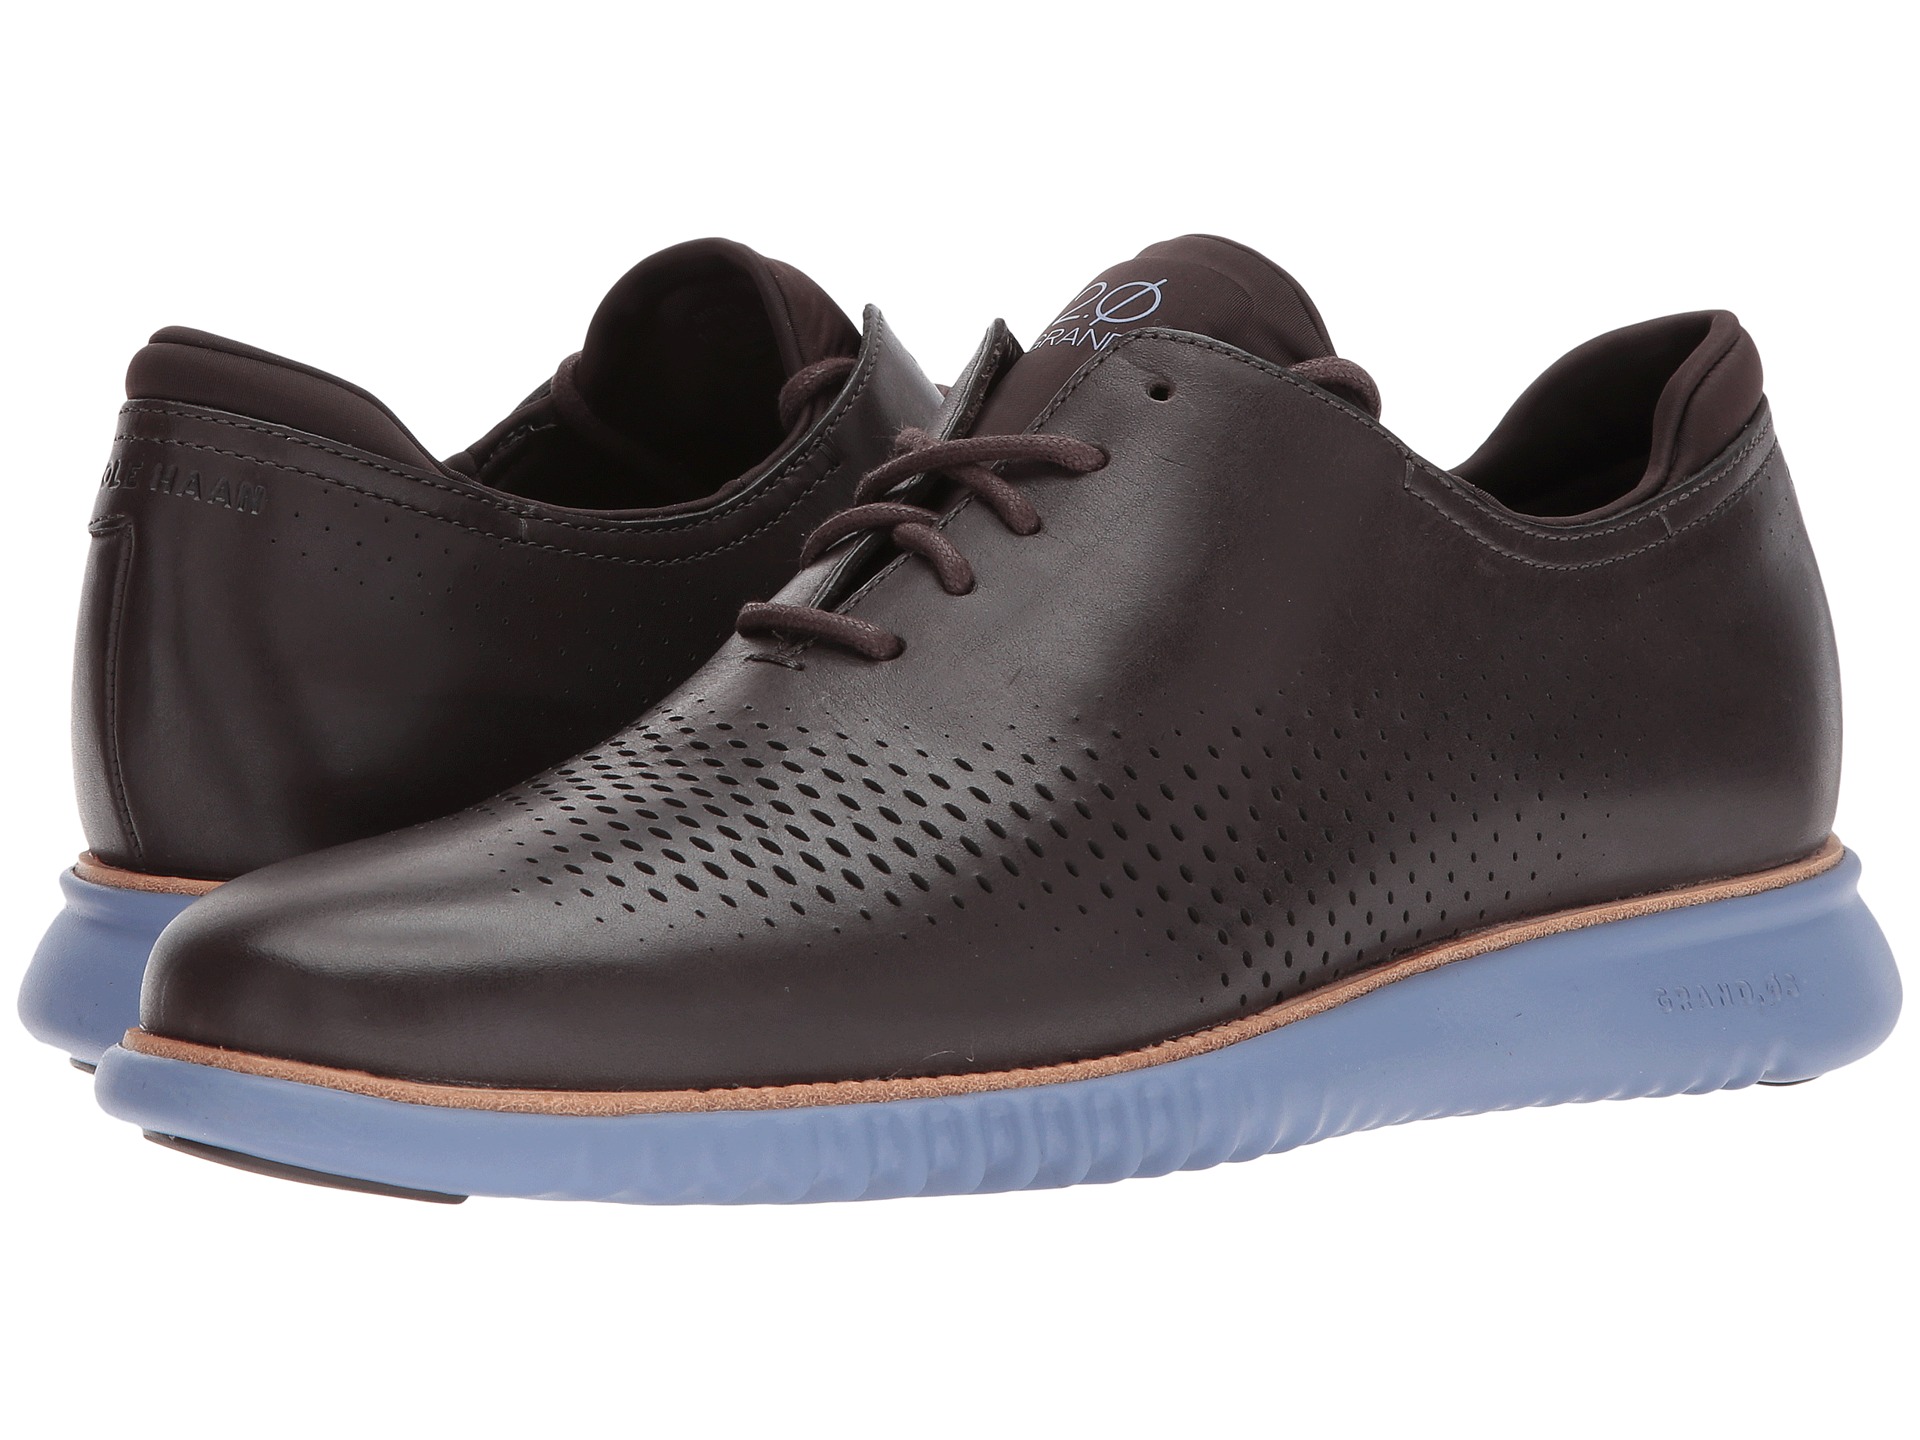 Cole Haan 2 Zerogrand LSR Wing at Zappos.com